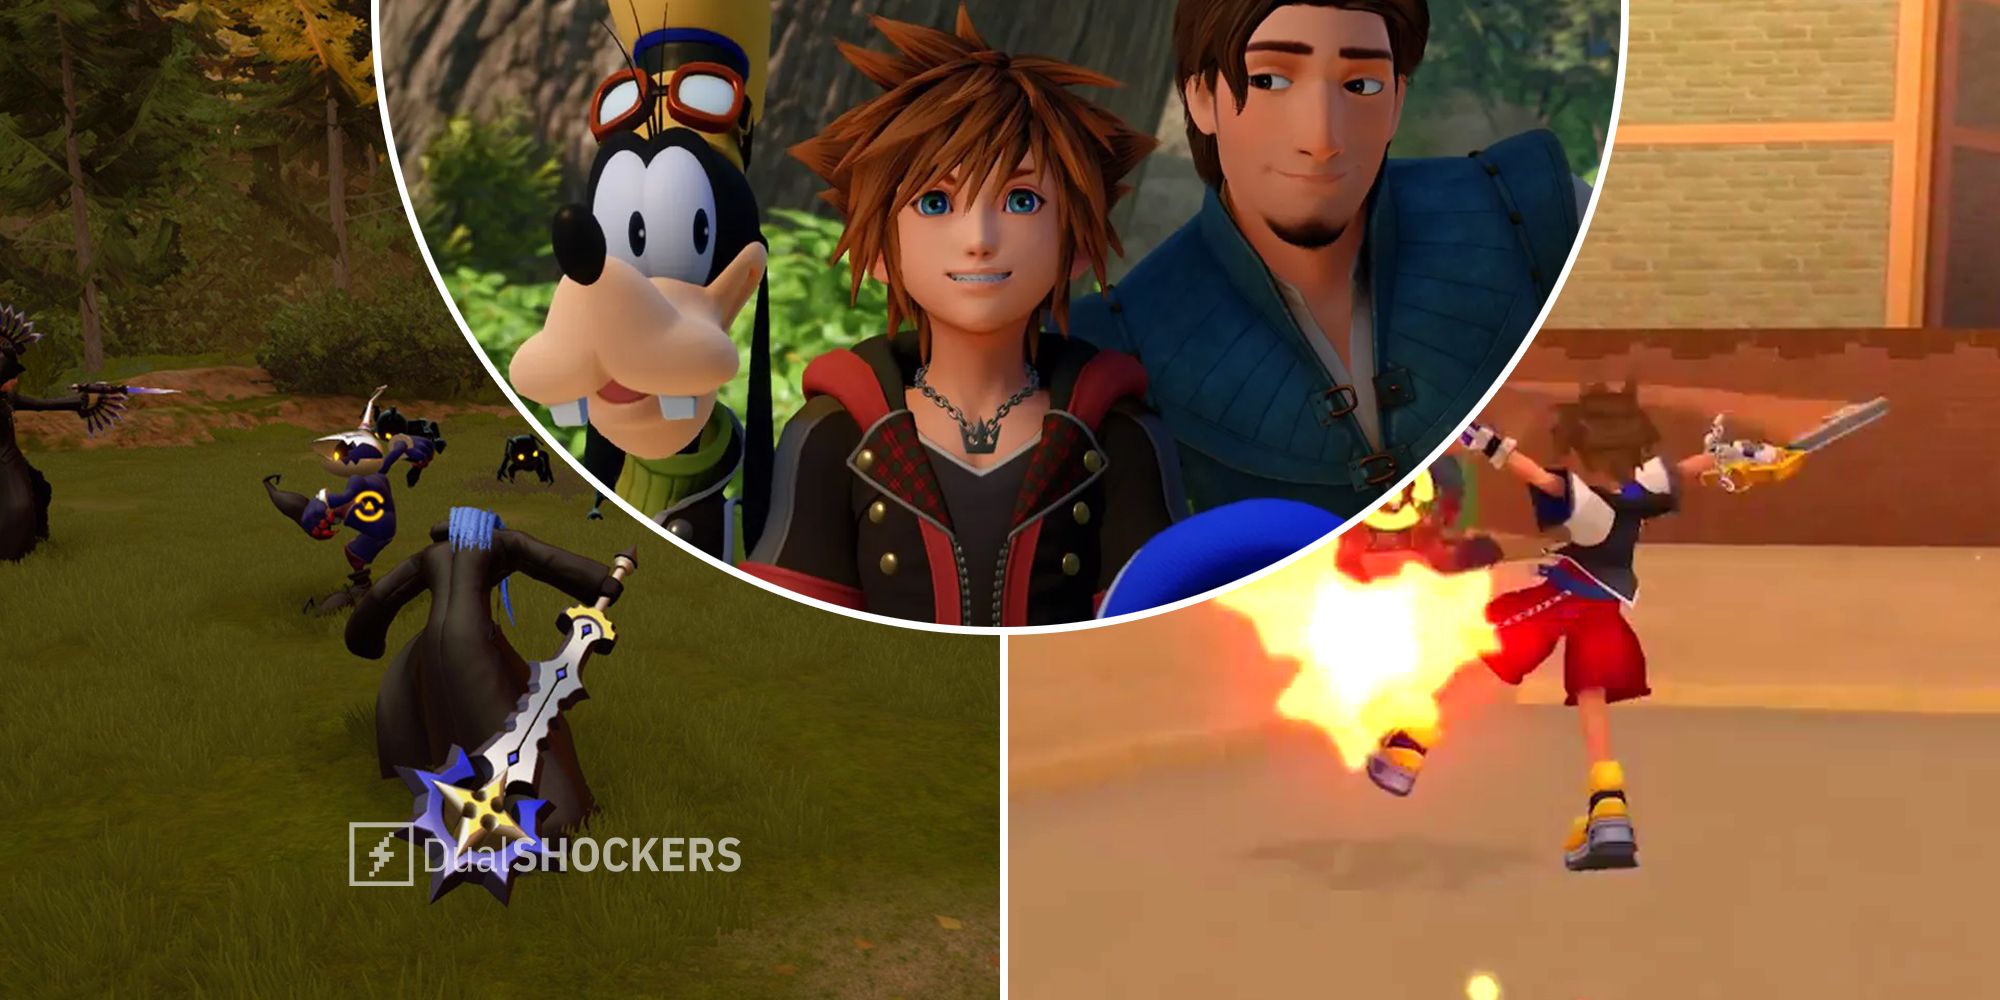 Kingdom Hearts 358/2 Days on left, Kingdom Hearts 3 in middle, Kingdom Hearts: Re: Chain of Memories on right